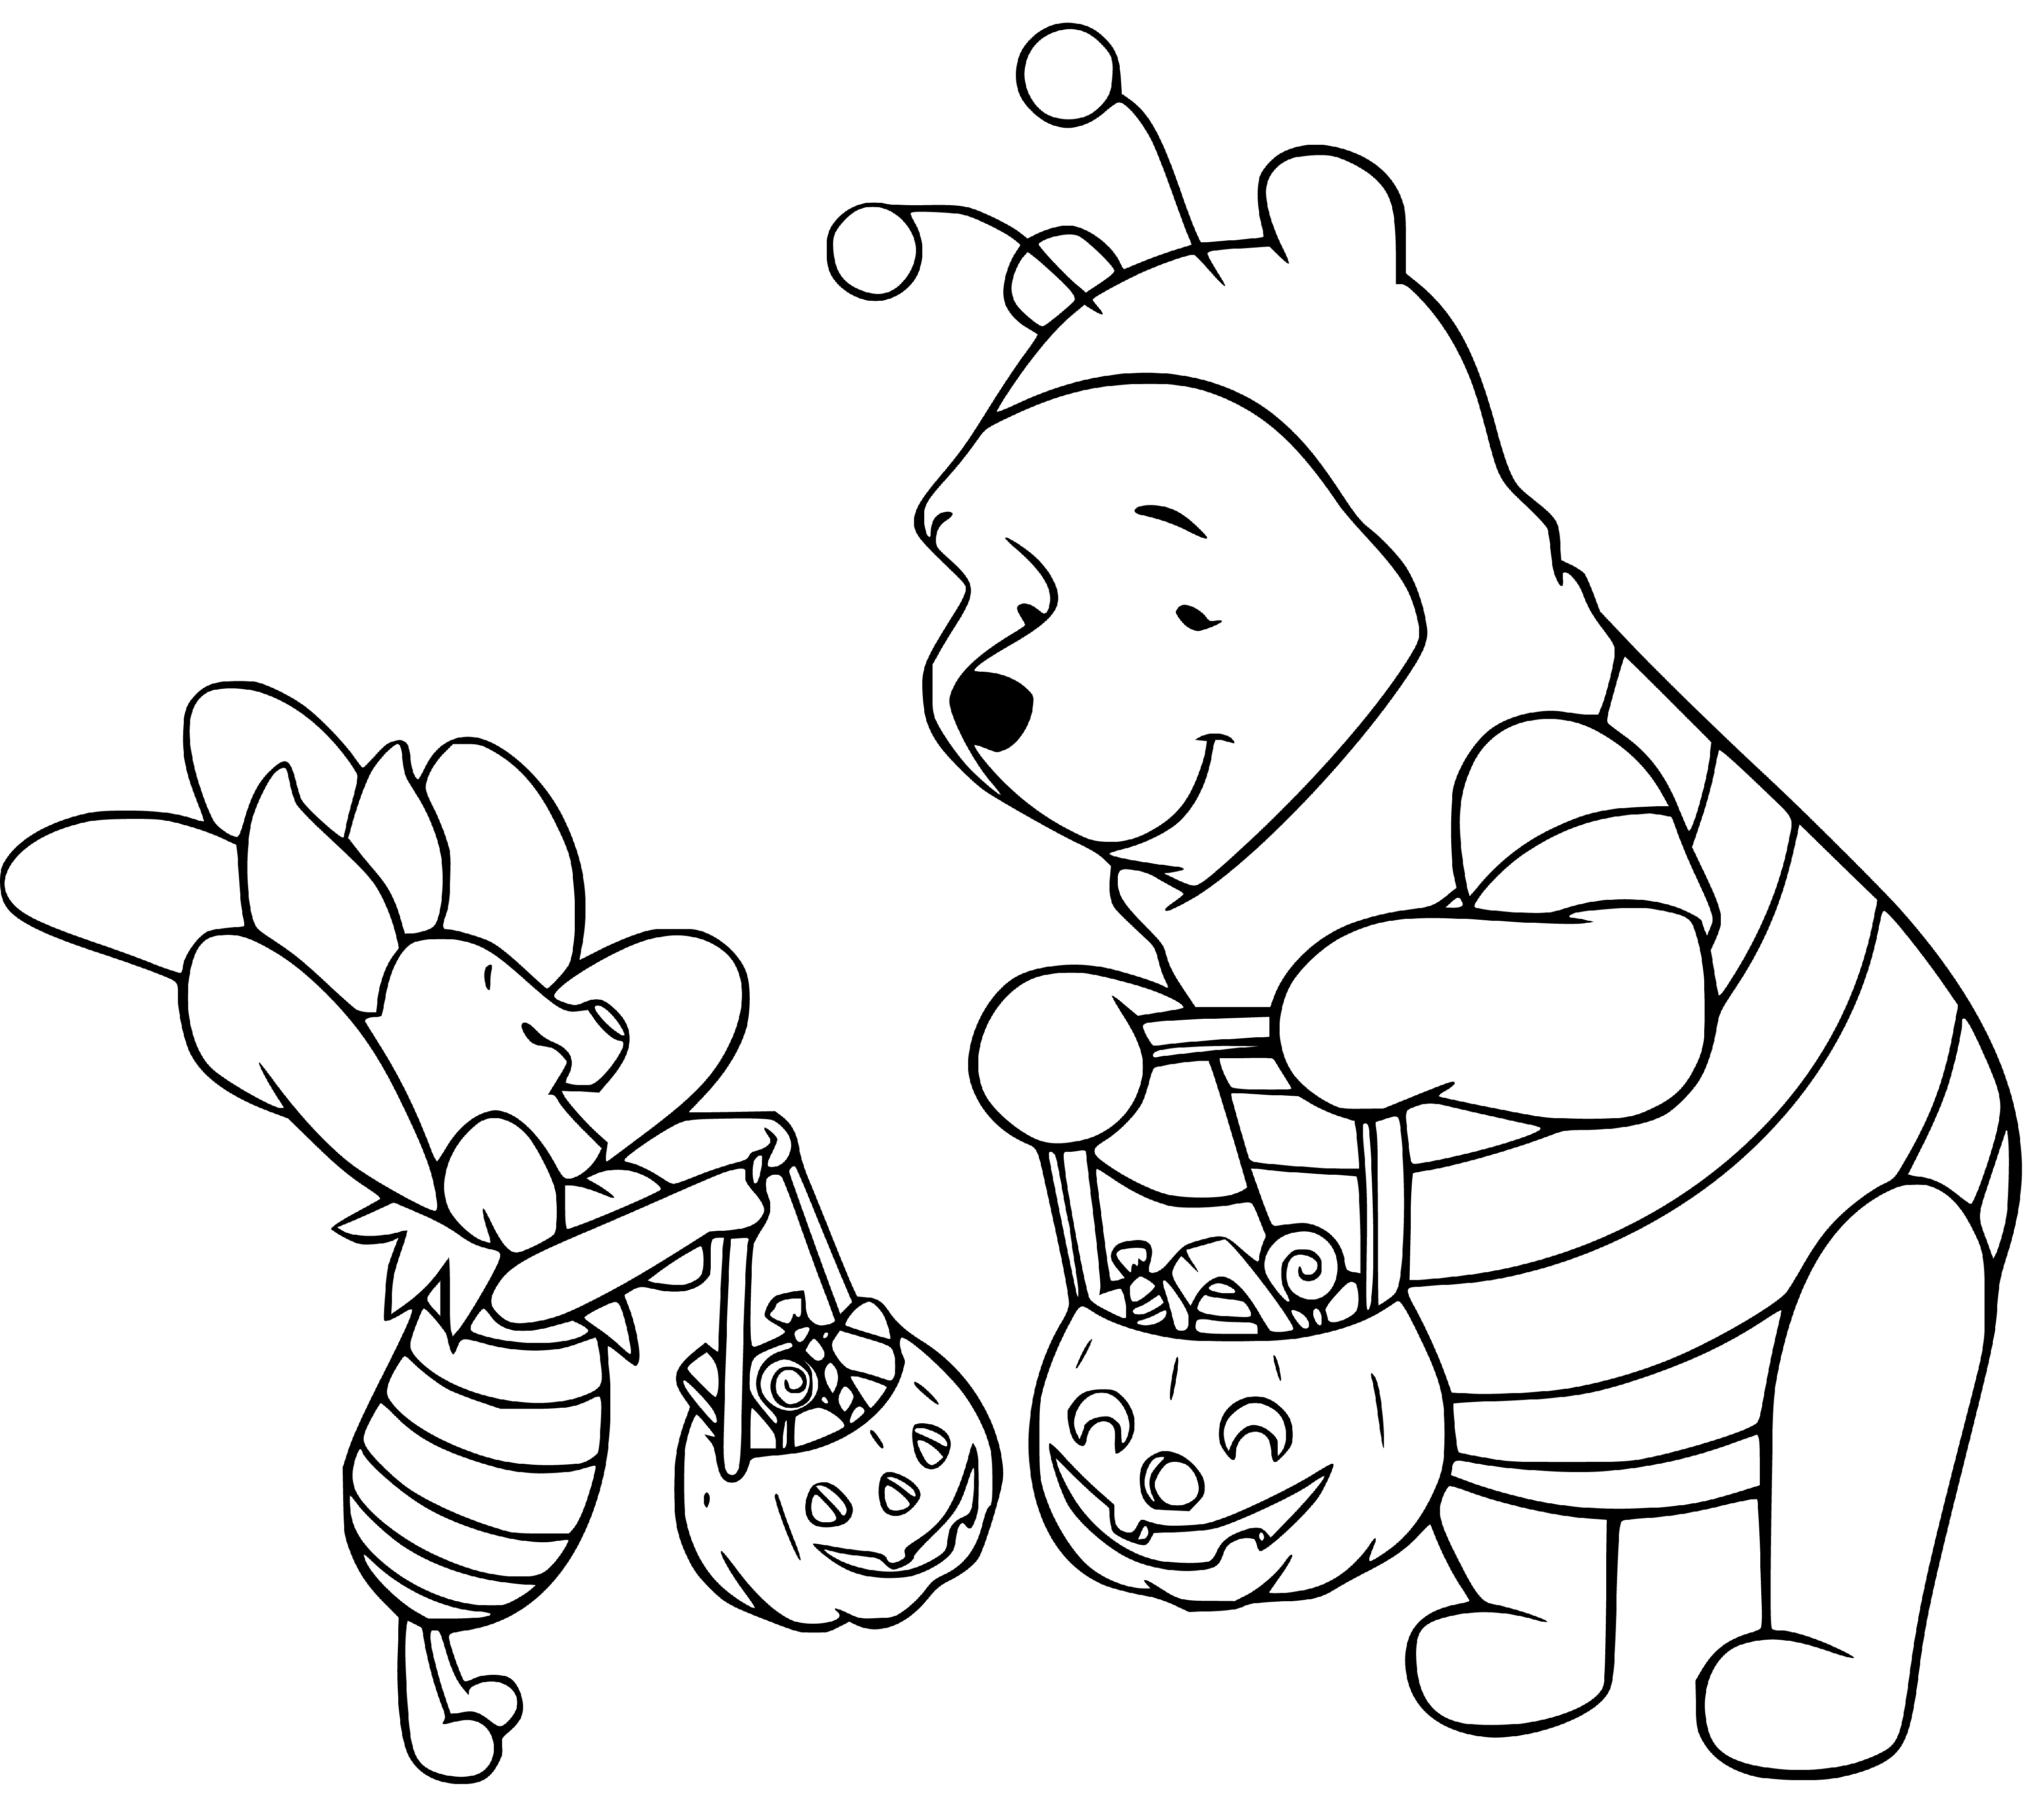 Printable Winnie The Pooh Halloween Coloring Page for kids.